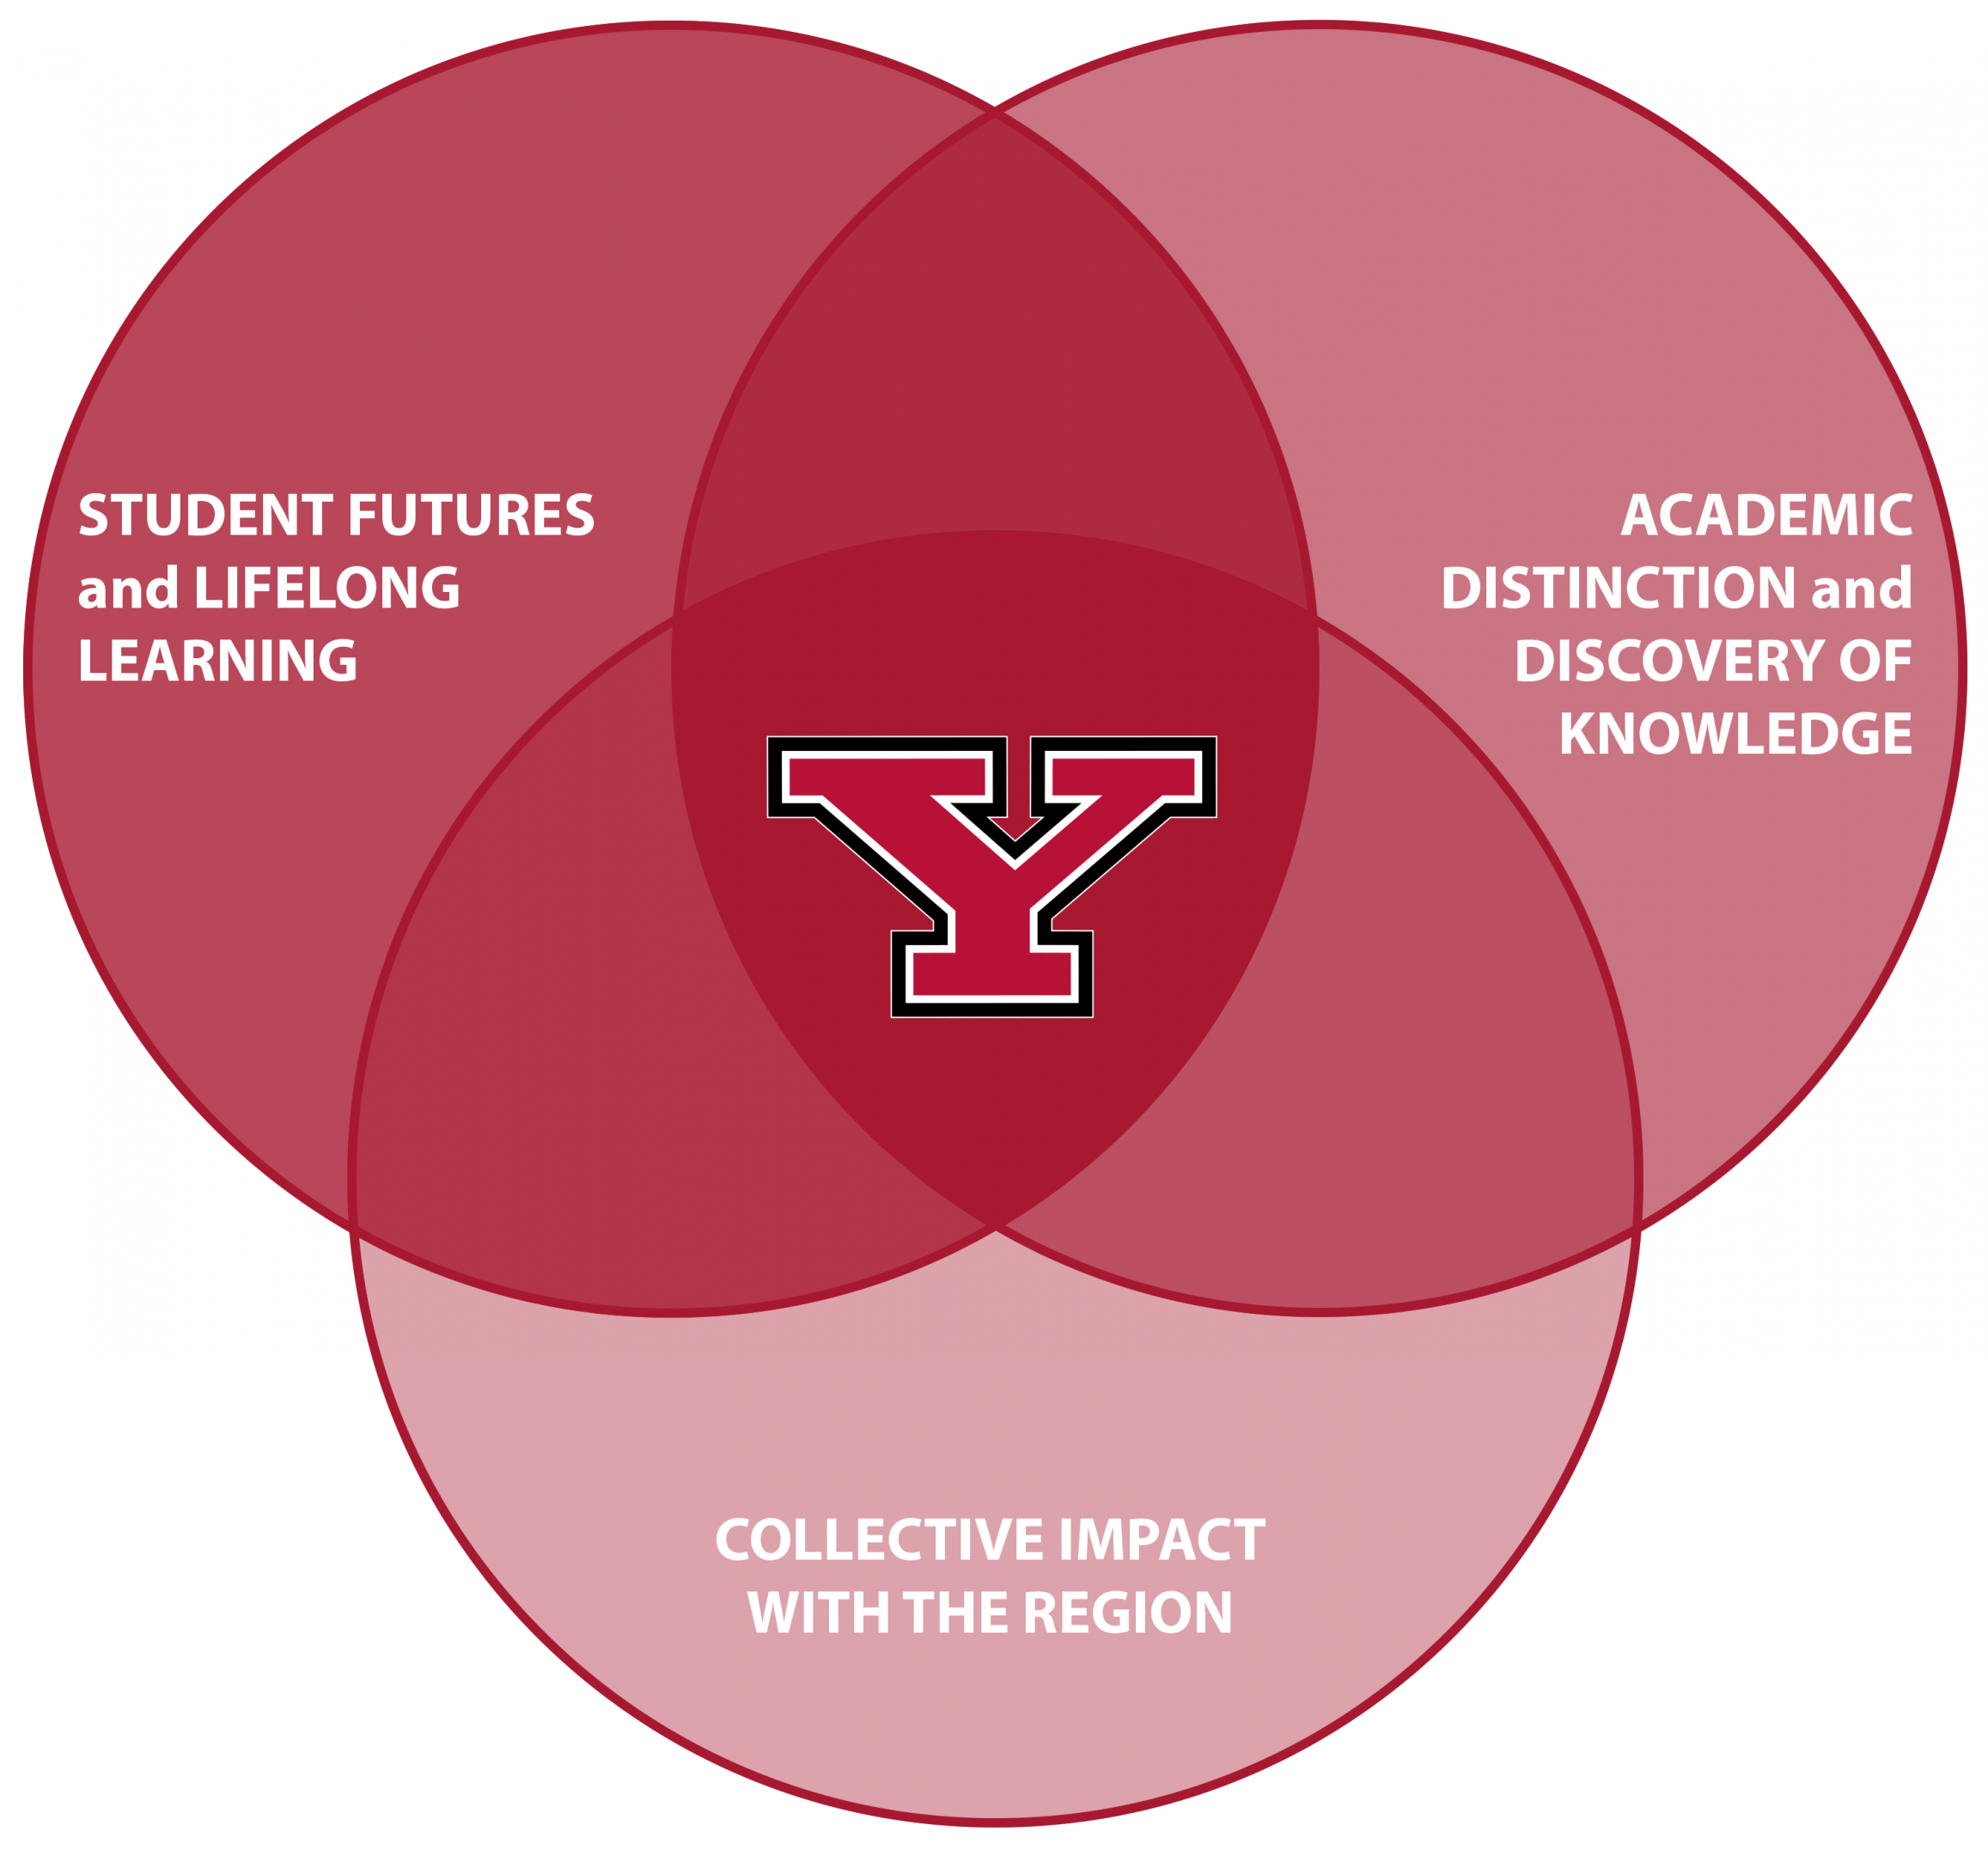 Strategic Planning venn diagram showing the intersection of student futures and life long learnnig, academic distinction and discovery of knowledge and collective impact within the region.